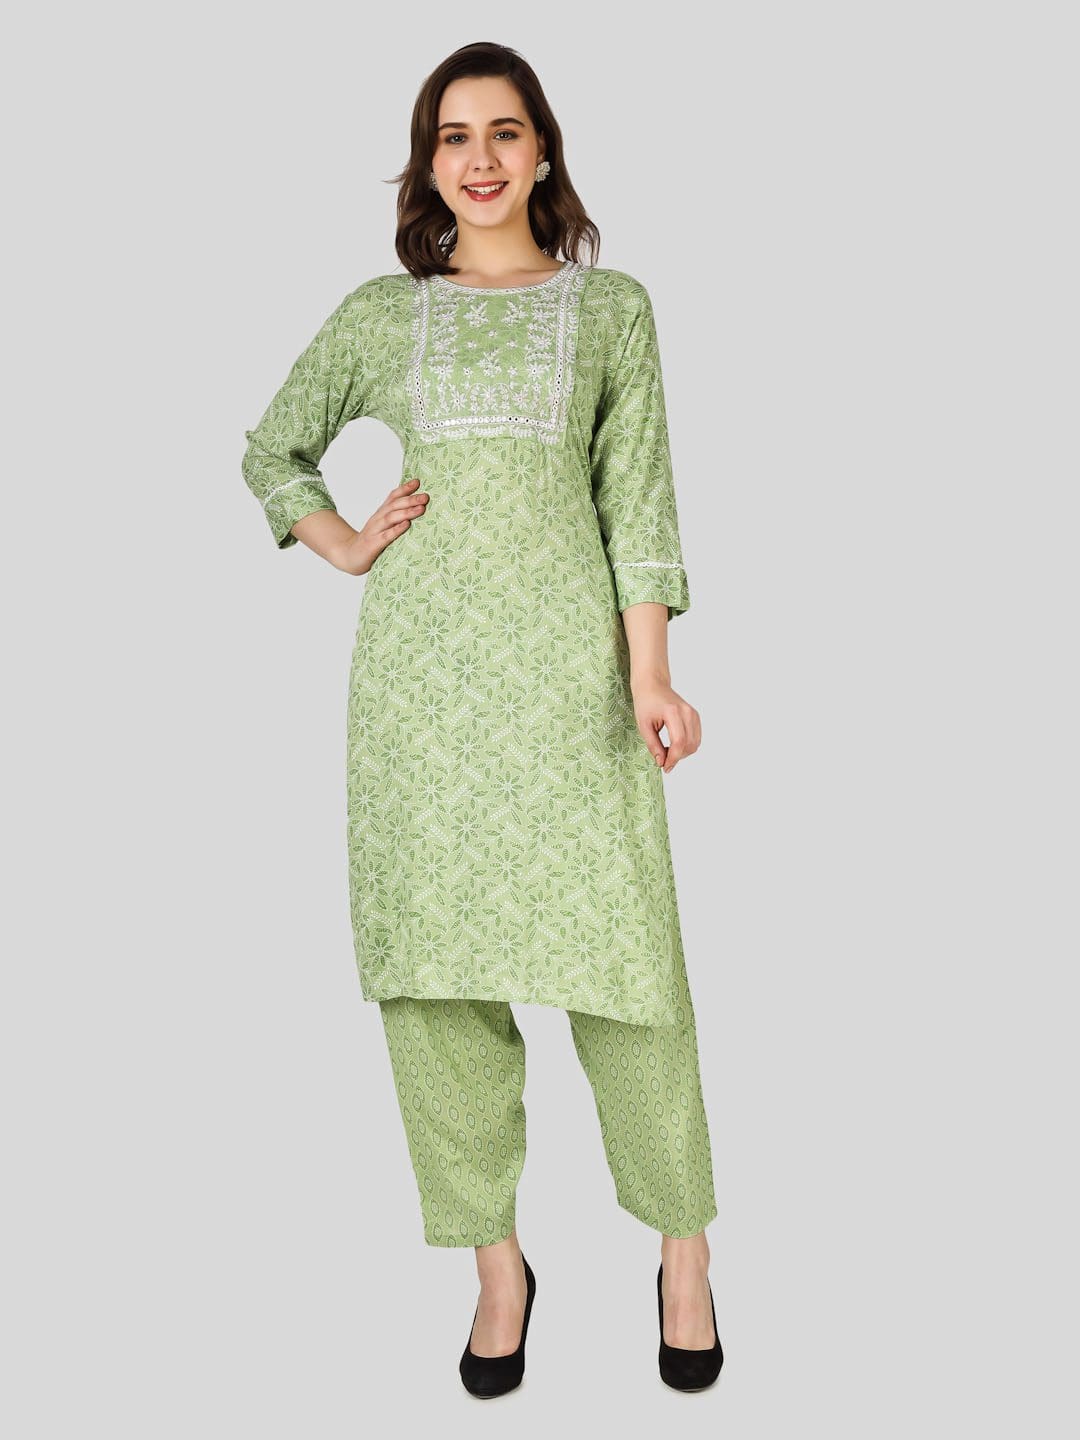 Glossy Light Green Embroidered Printed Kurti Set For Women